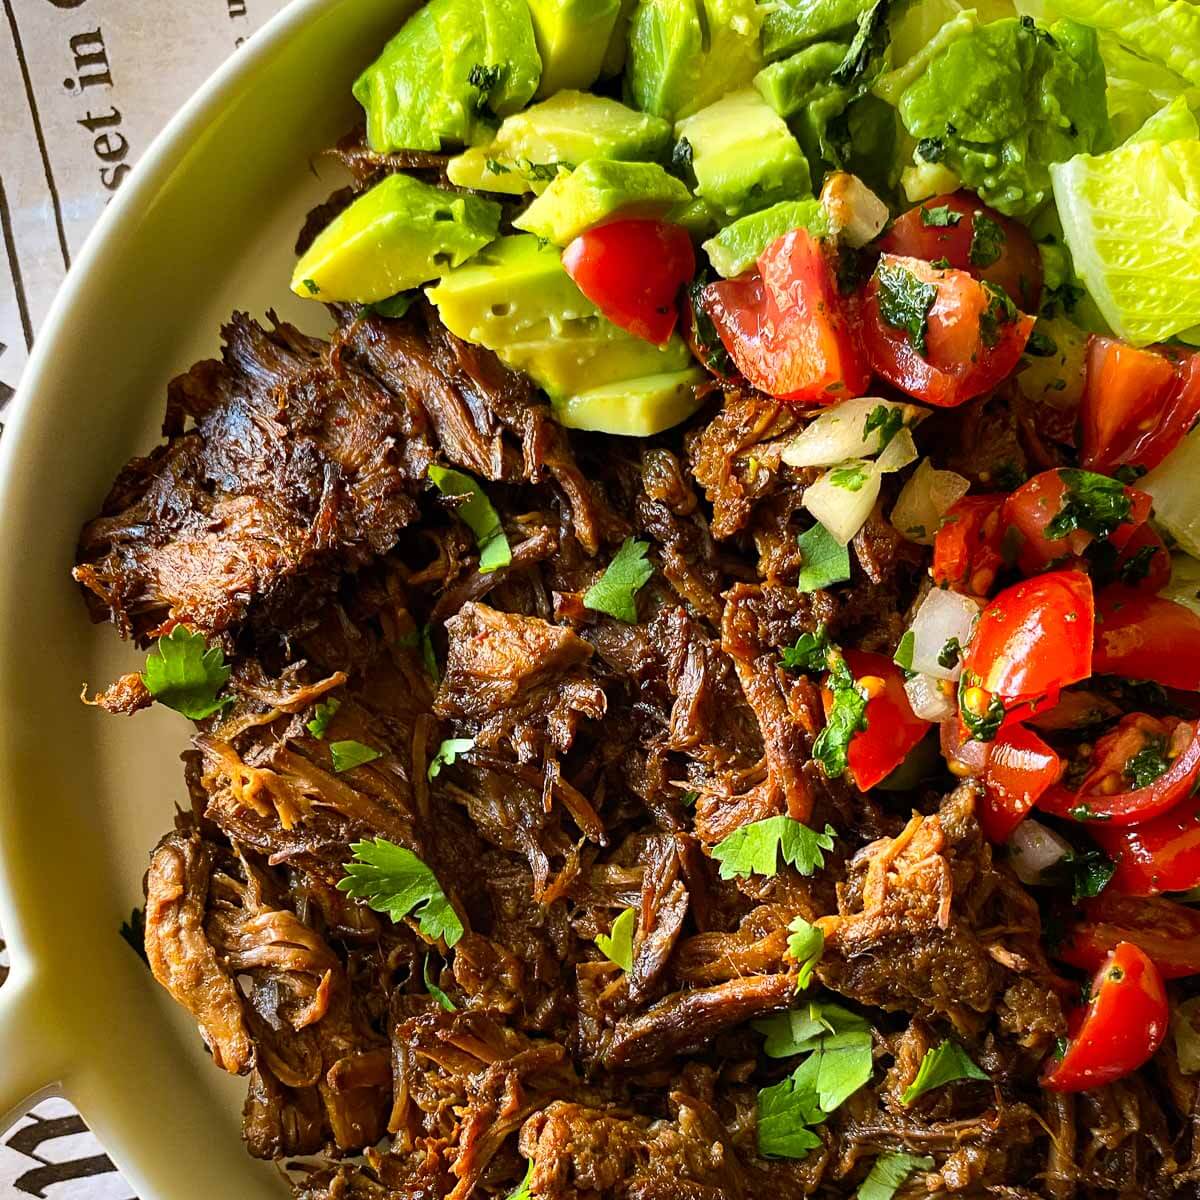 Slow Cooker Mexican Shredded Beef (Barbacoa)